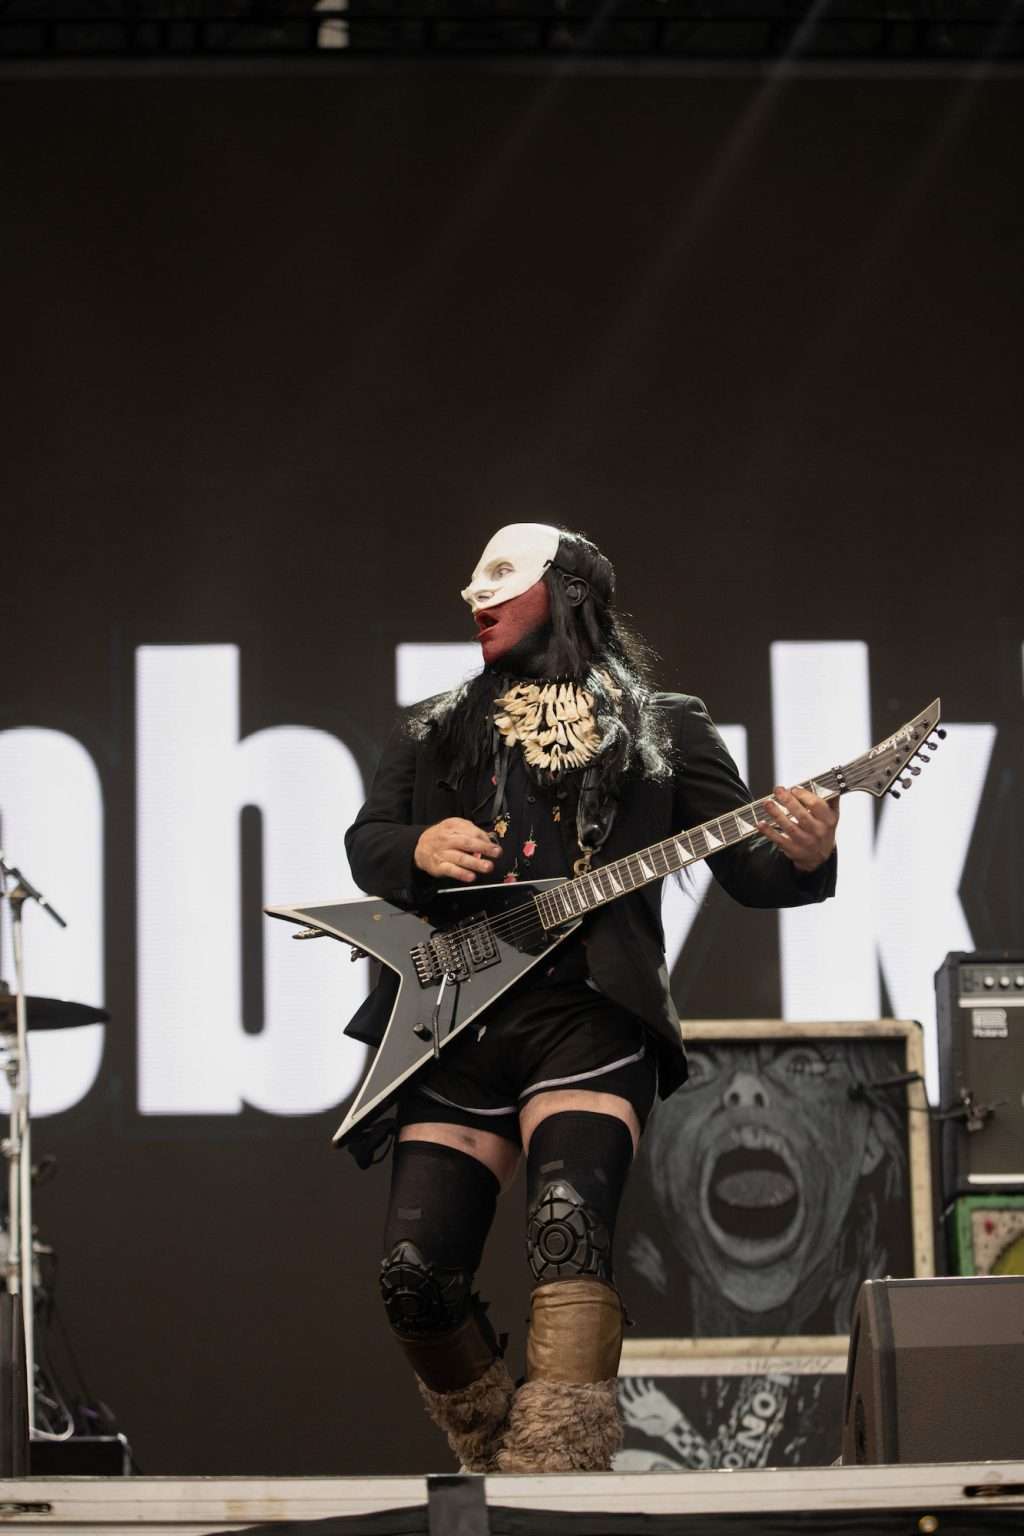 Limp Bizkit Live at Lollapalooza [GALLERY] Chicago Music Guide